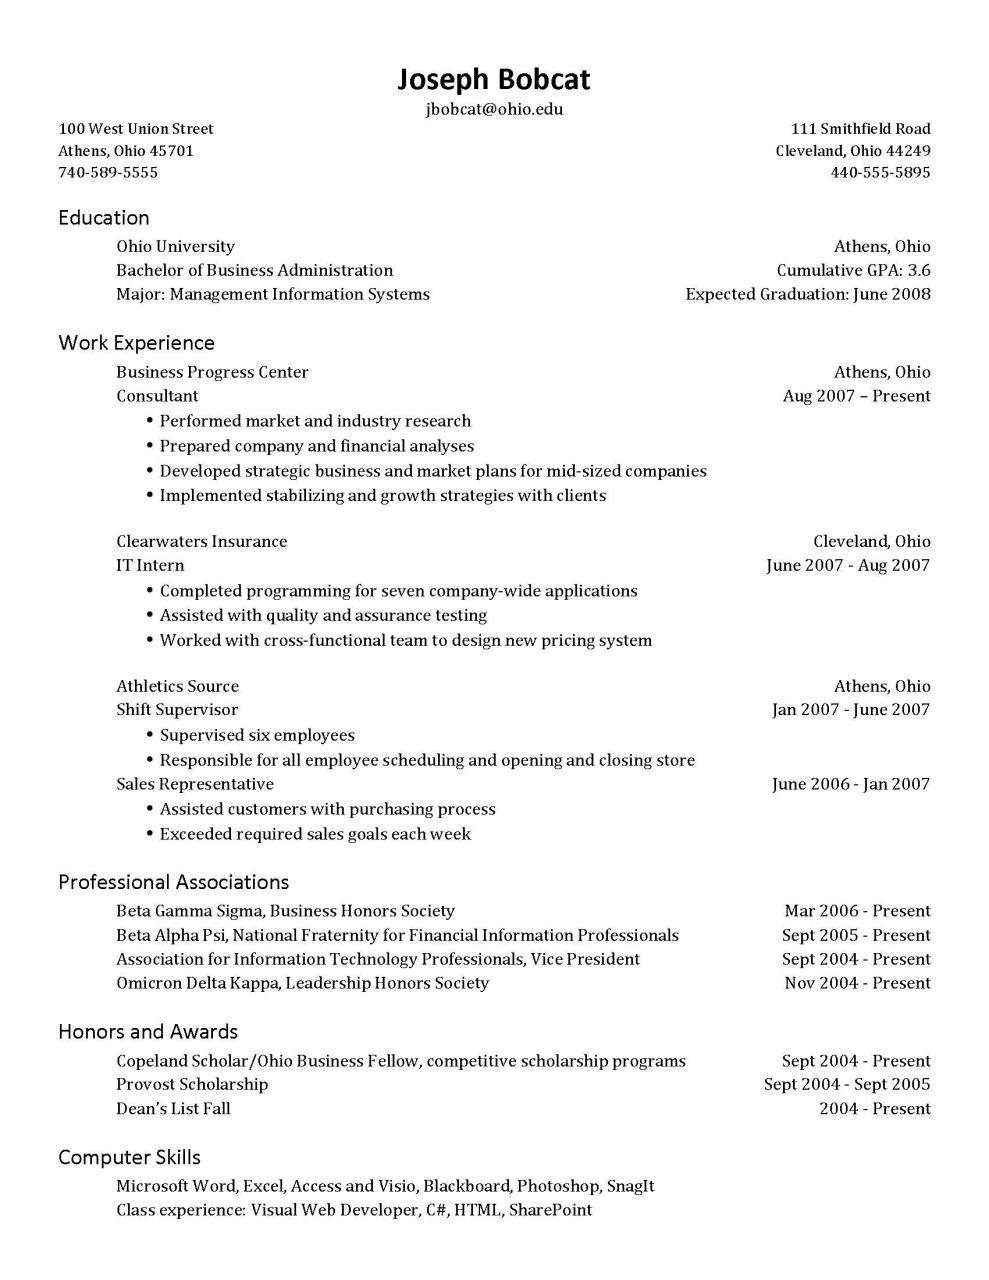 The Best How To Write Education On Resume When Still In College Ideas